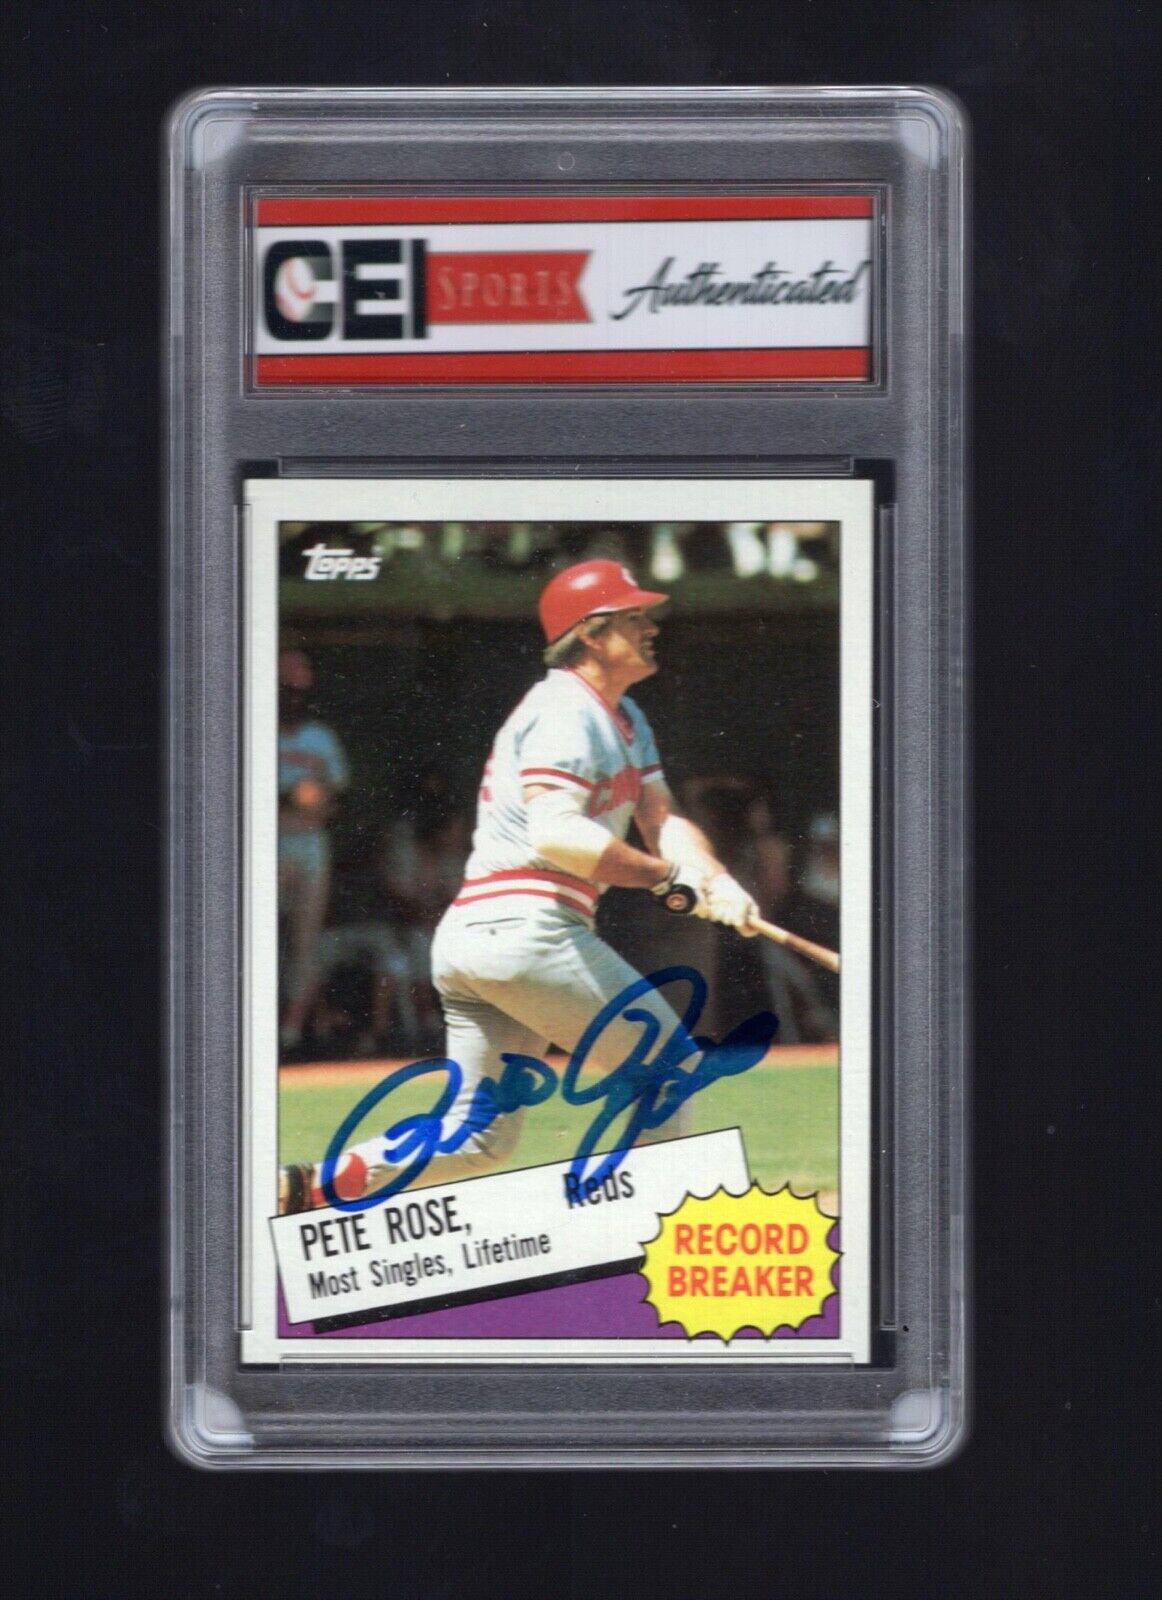 1985 Topps #6 Pete Rose signed & Autograph with CEI Authenticated